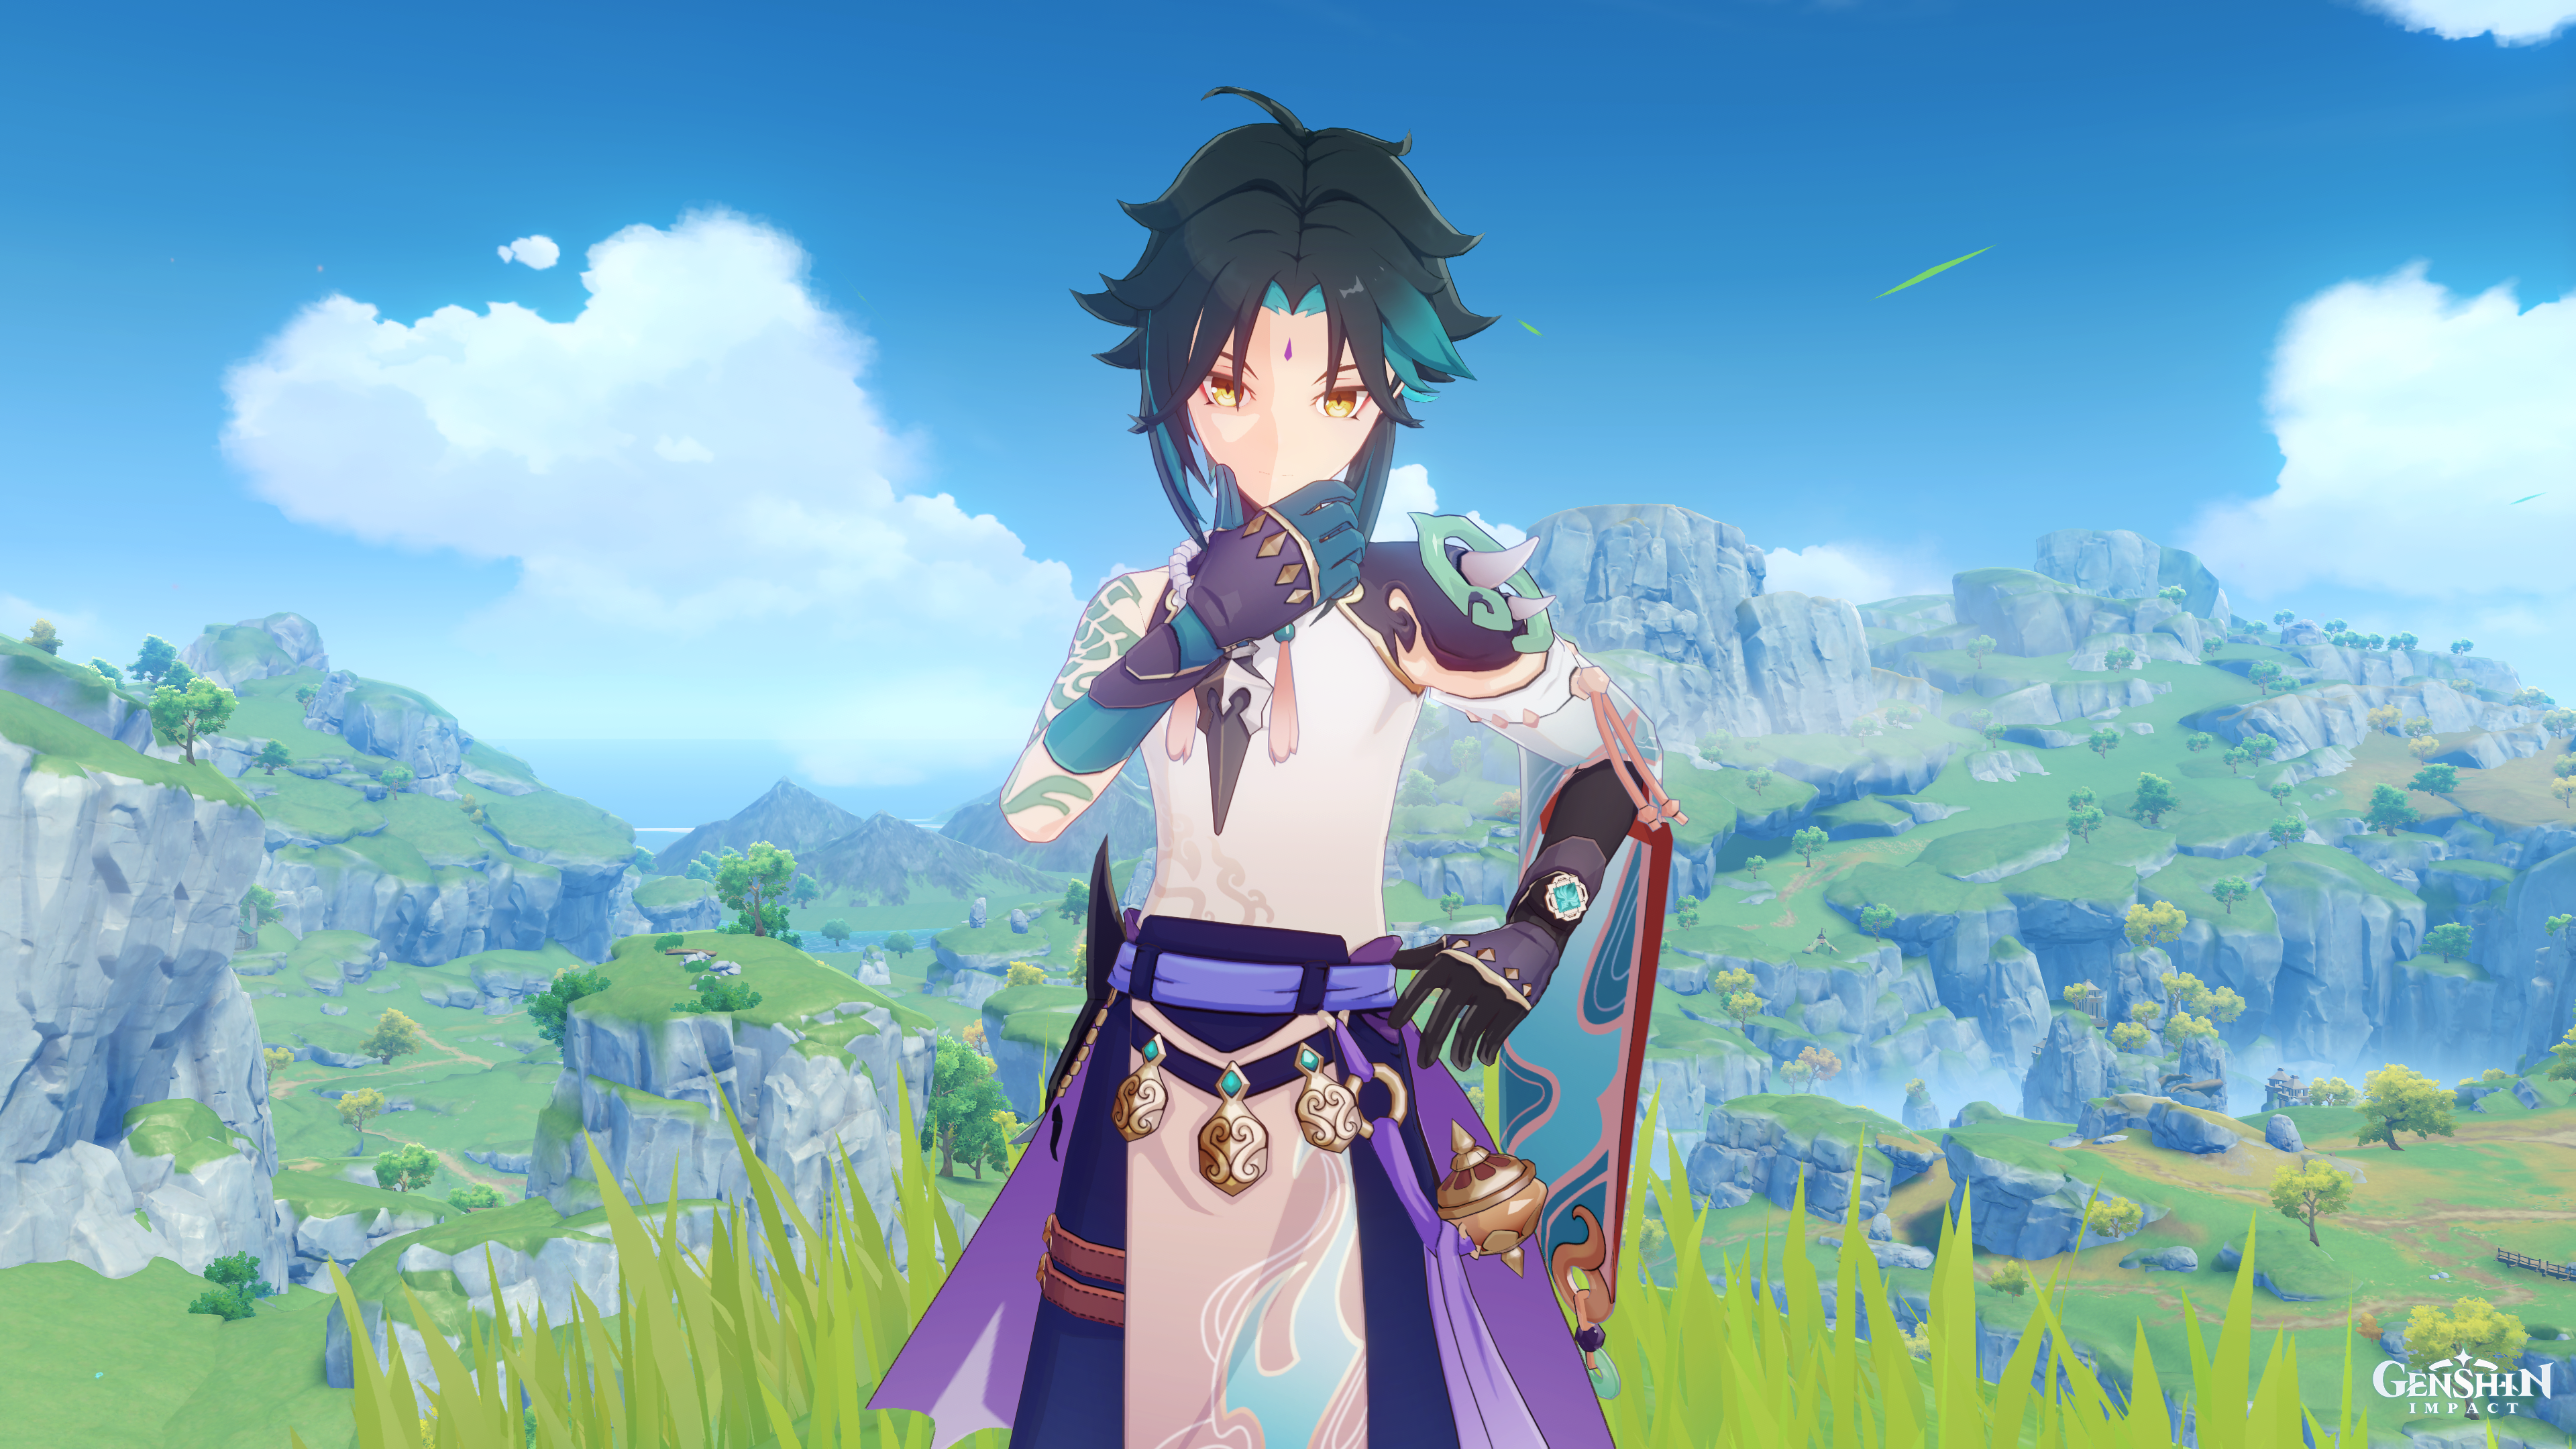 xiao standing thinking in genshin impact. the landscape of liyue is sprawling behind him